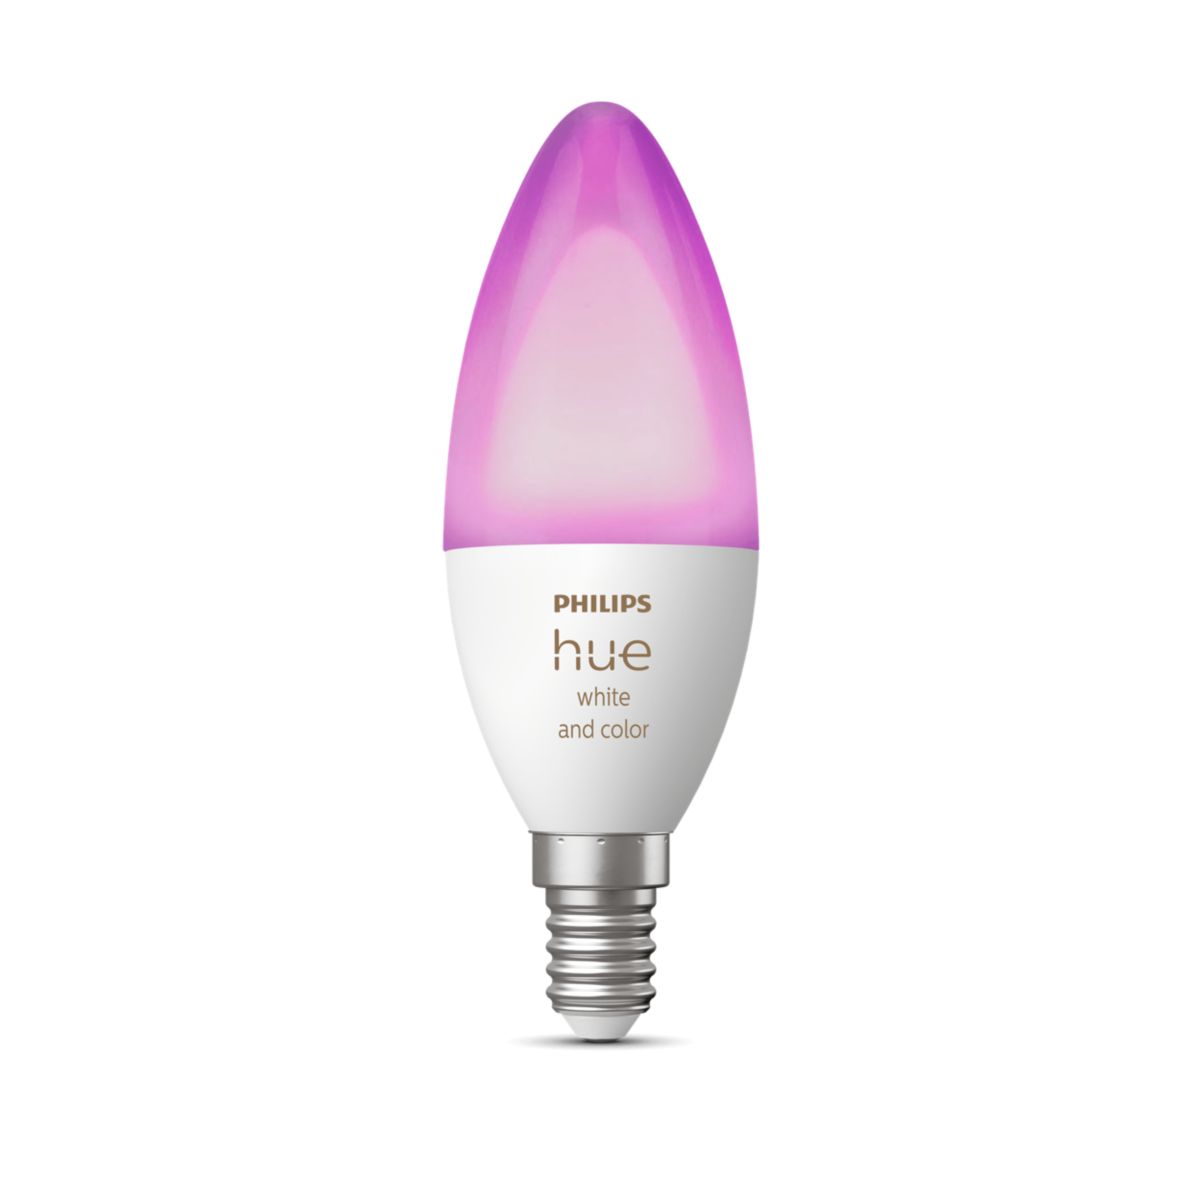 Philips Hue E14 kaarslamp white and color ambiance 470lm